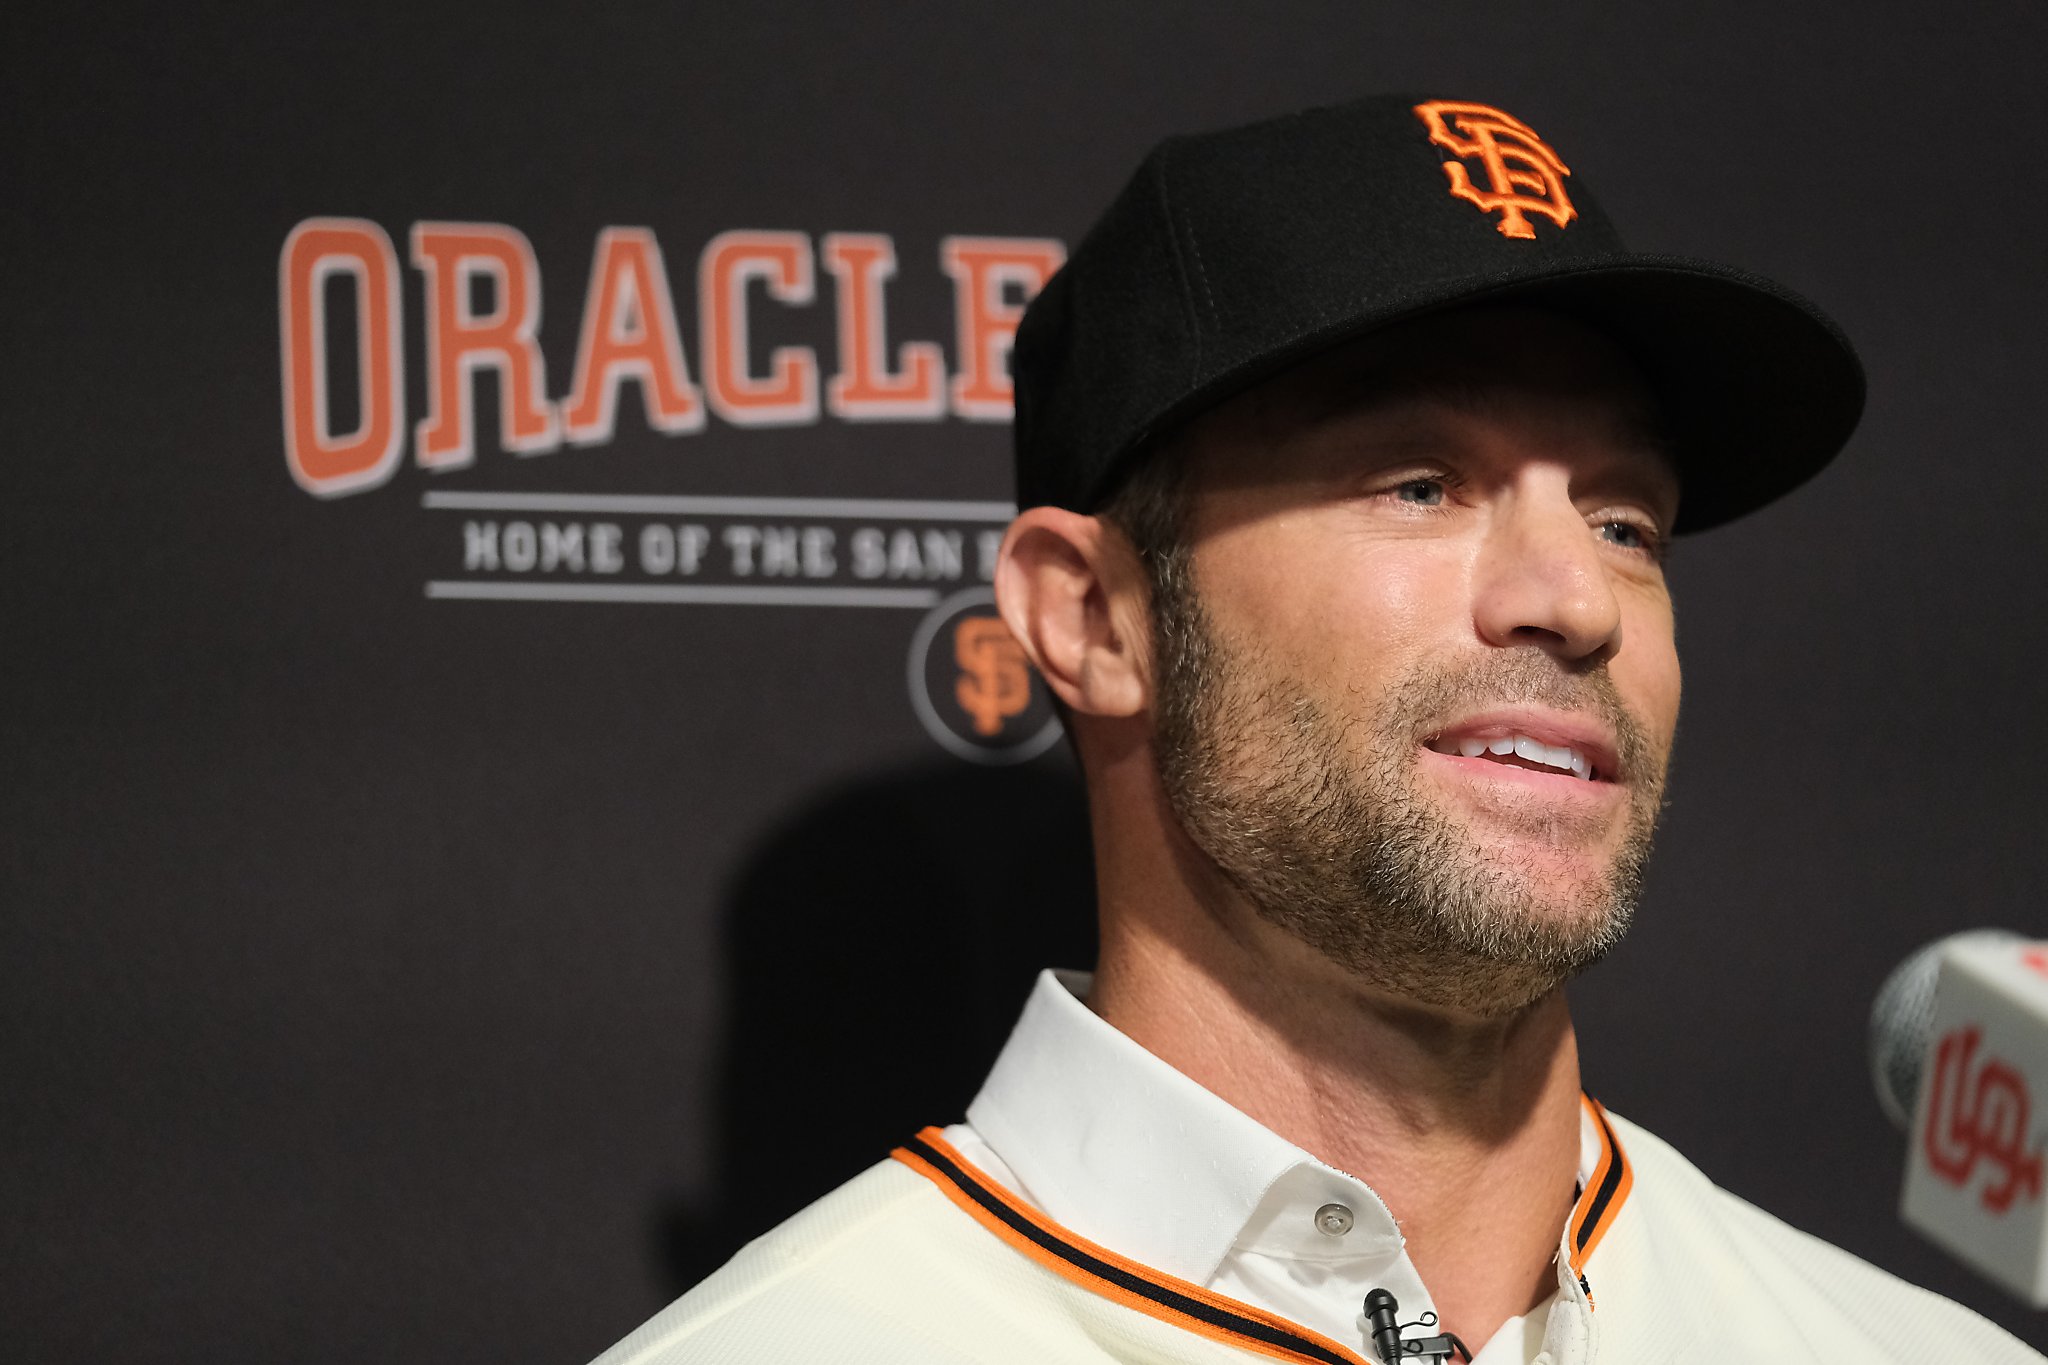 Gabe Kapler and Giants Have 13-Person Coaching Staff - The New York Times